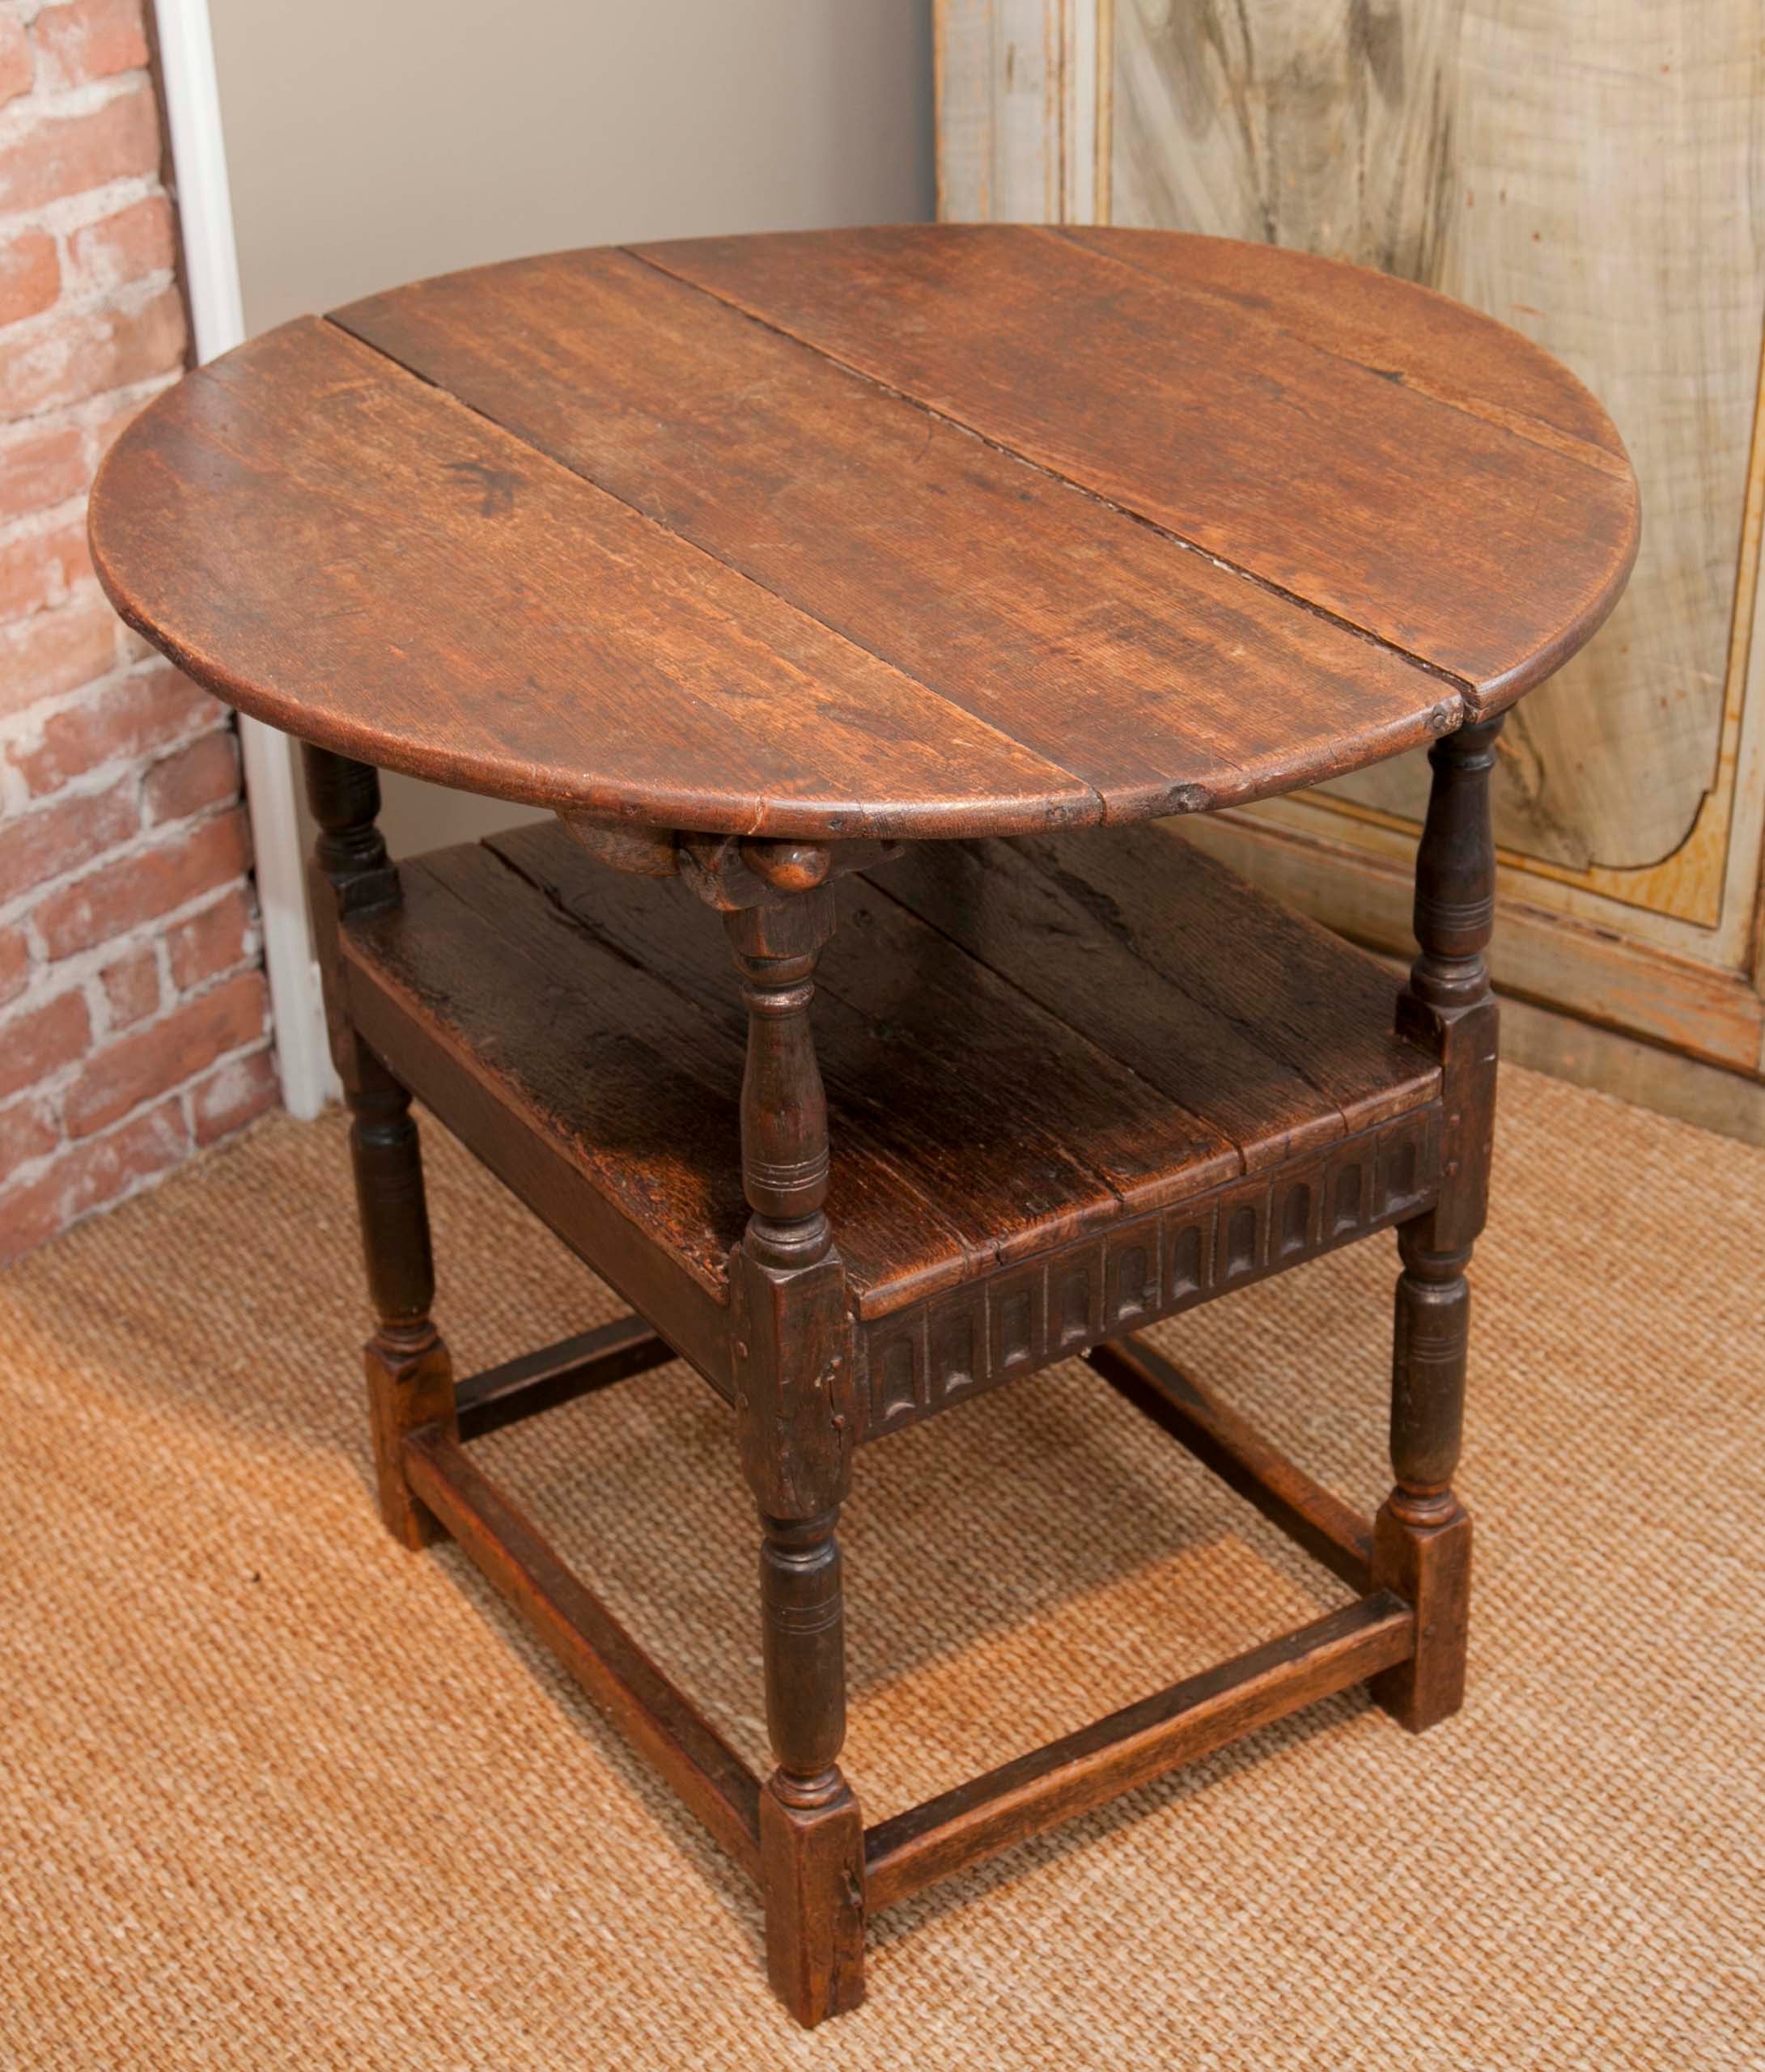 British Colonial Style Convertible Table/Chair